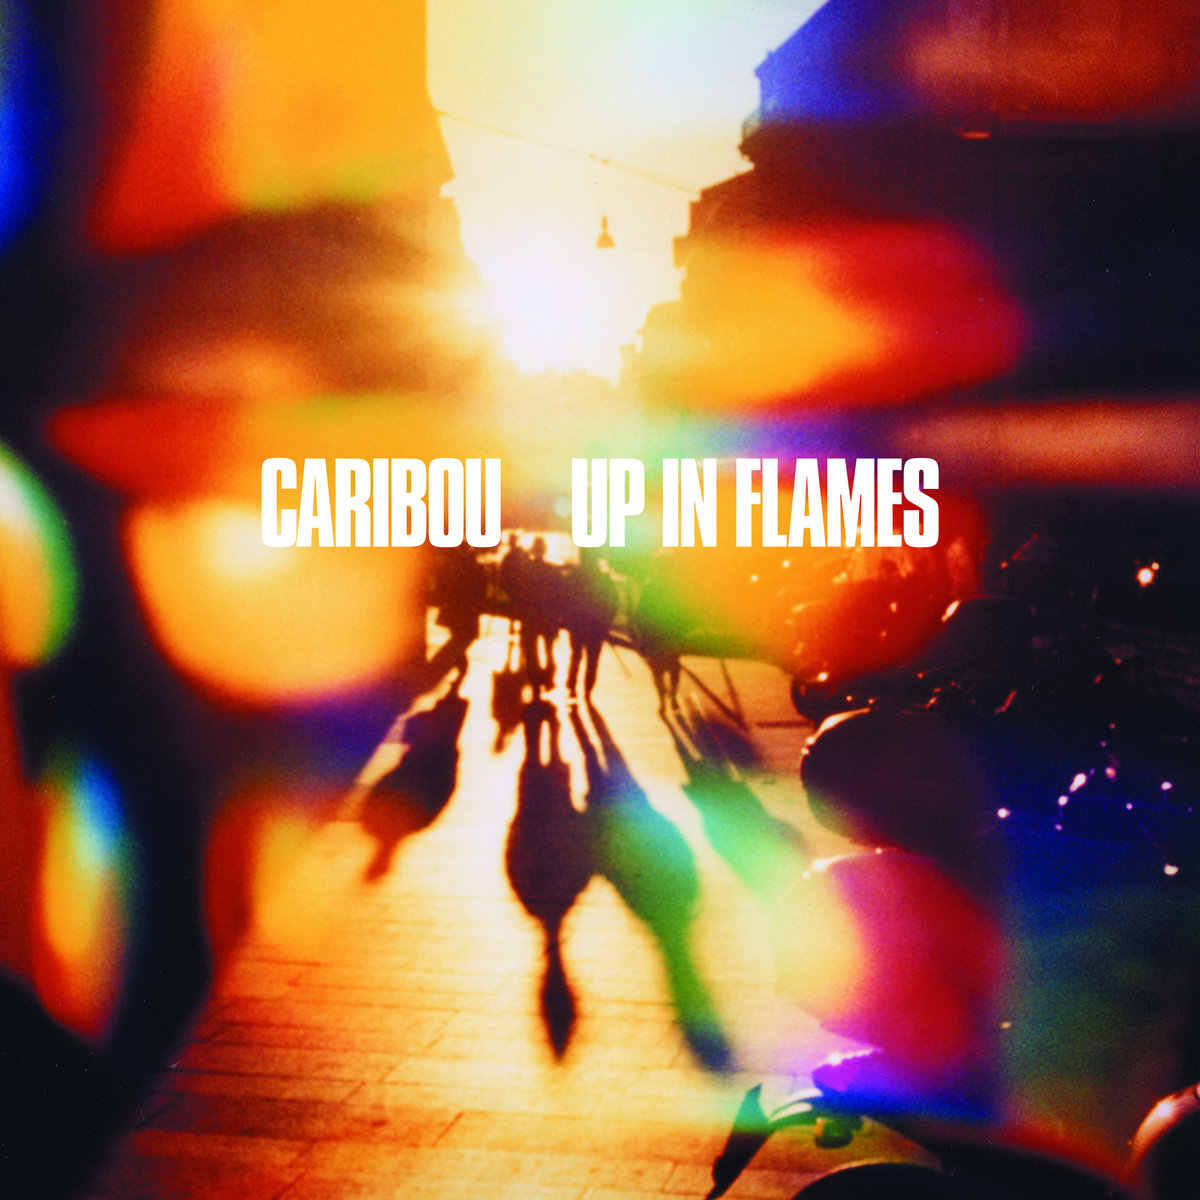 Caribou "Up in Flames" LP